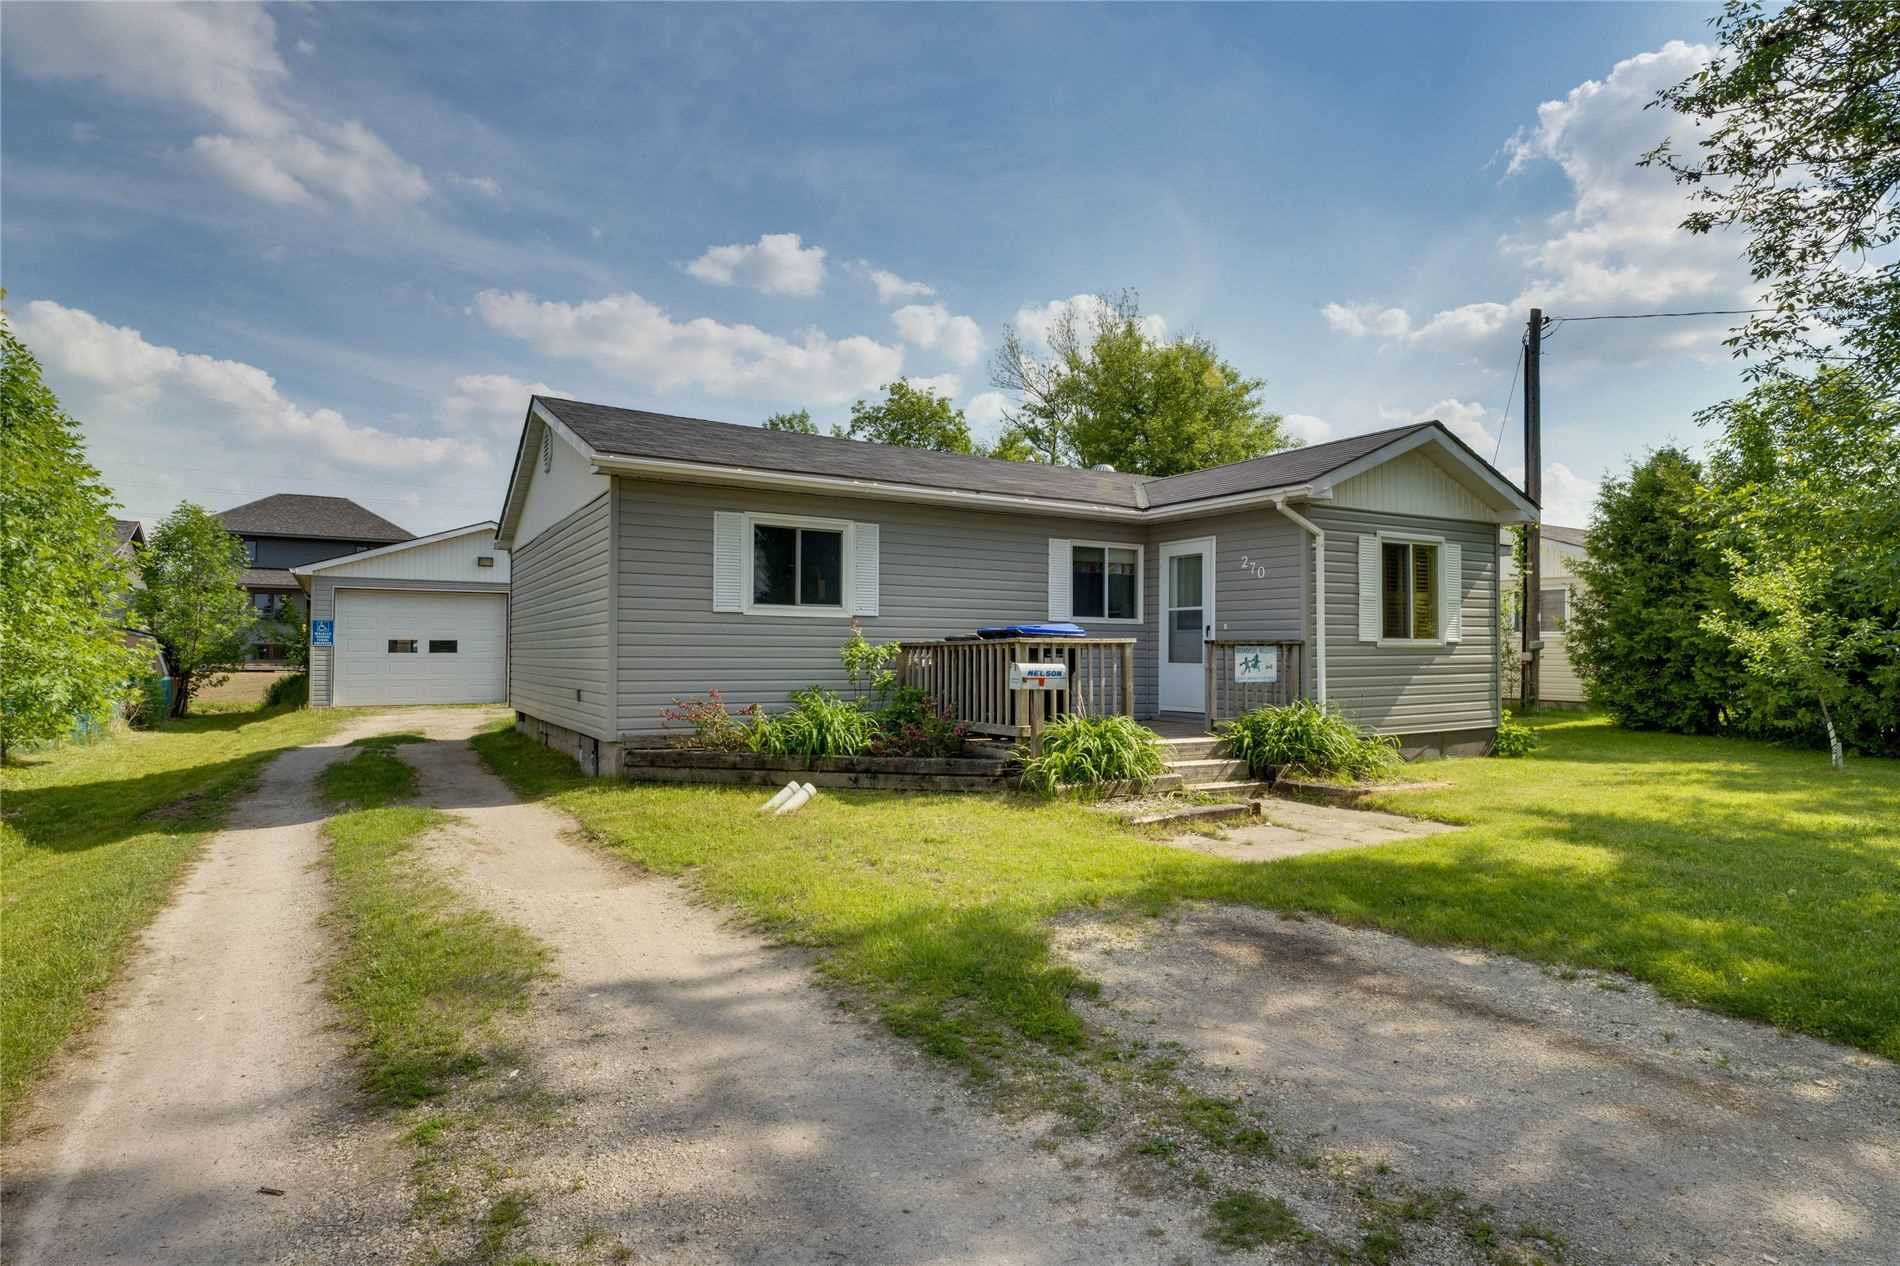 7525 County 91 Rd, Clearview, Ontario, Stayner